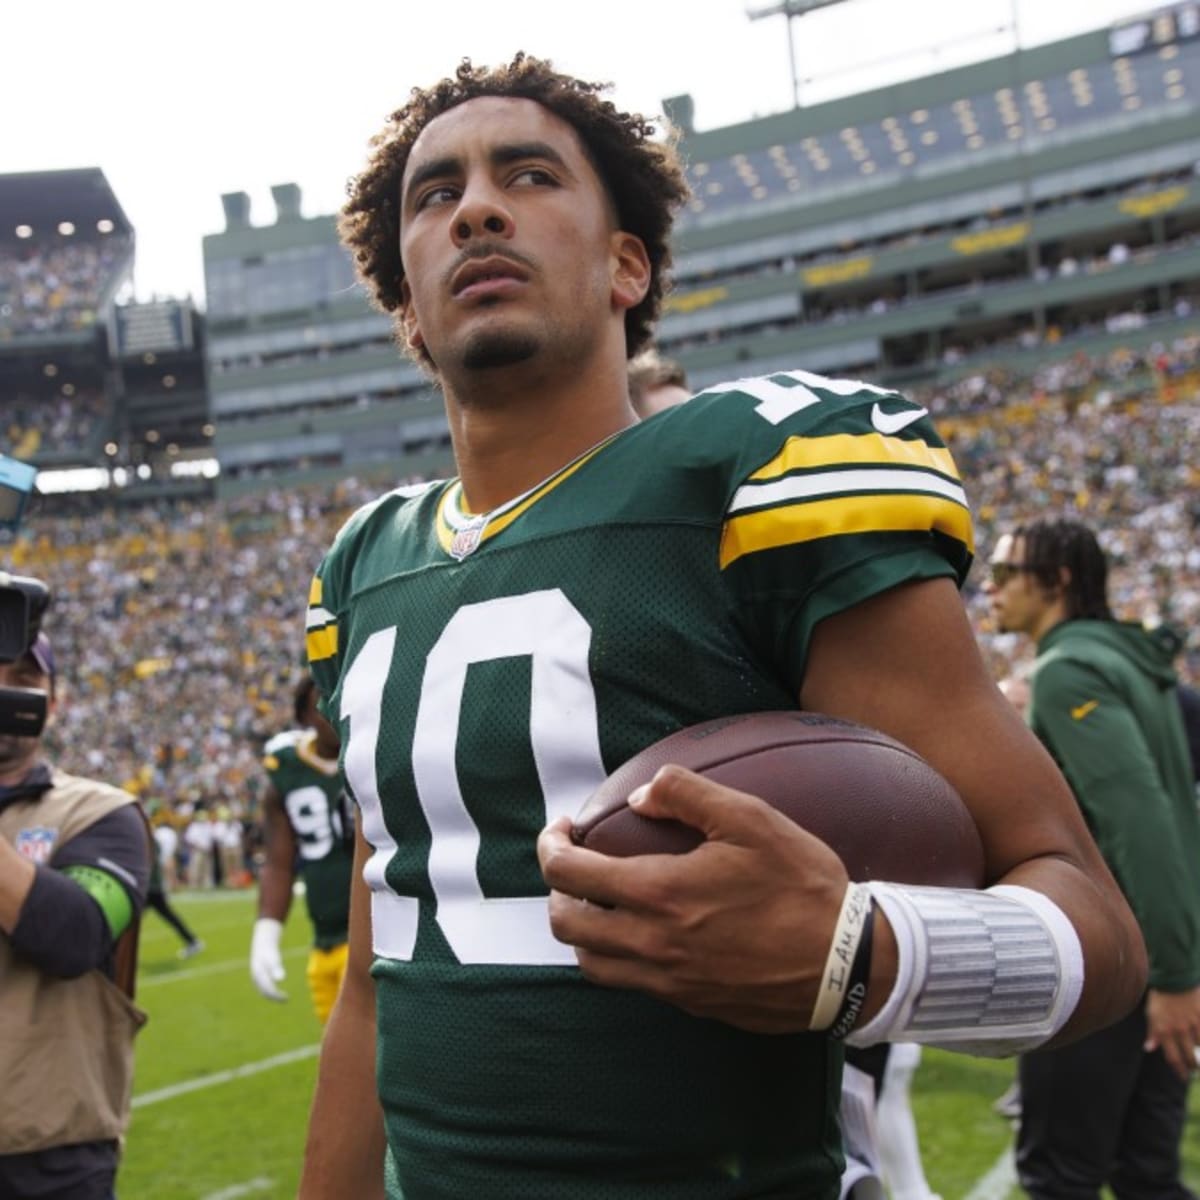 Packers QB Aaron Rodgers finishes with perfect passer rating vs. Raiders